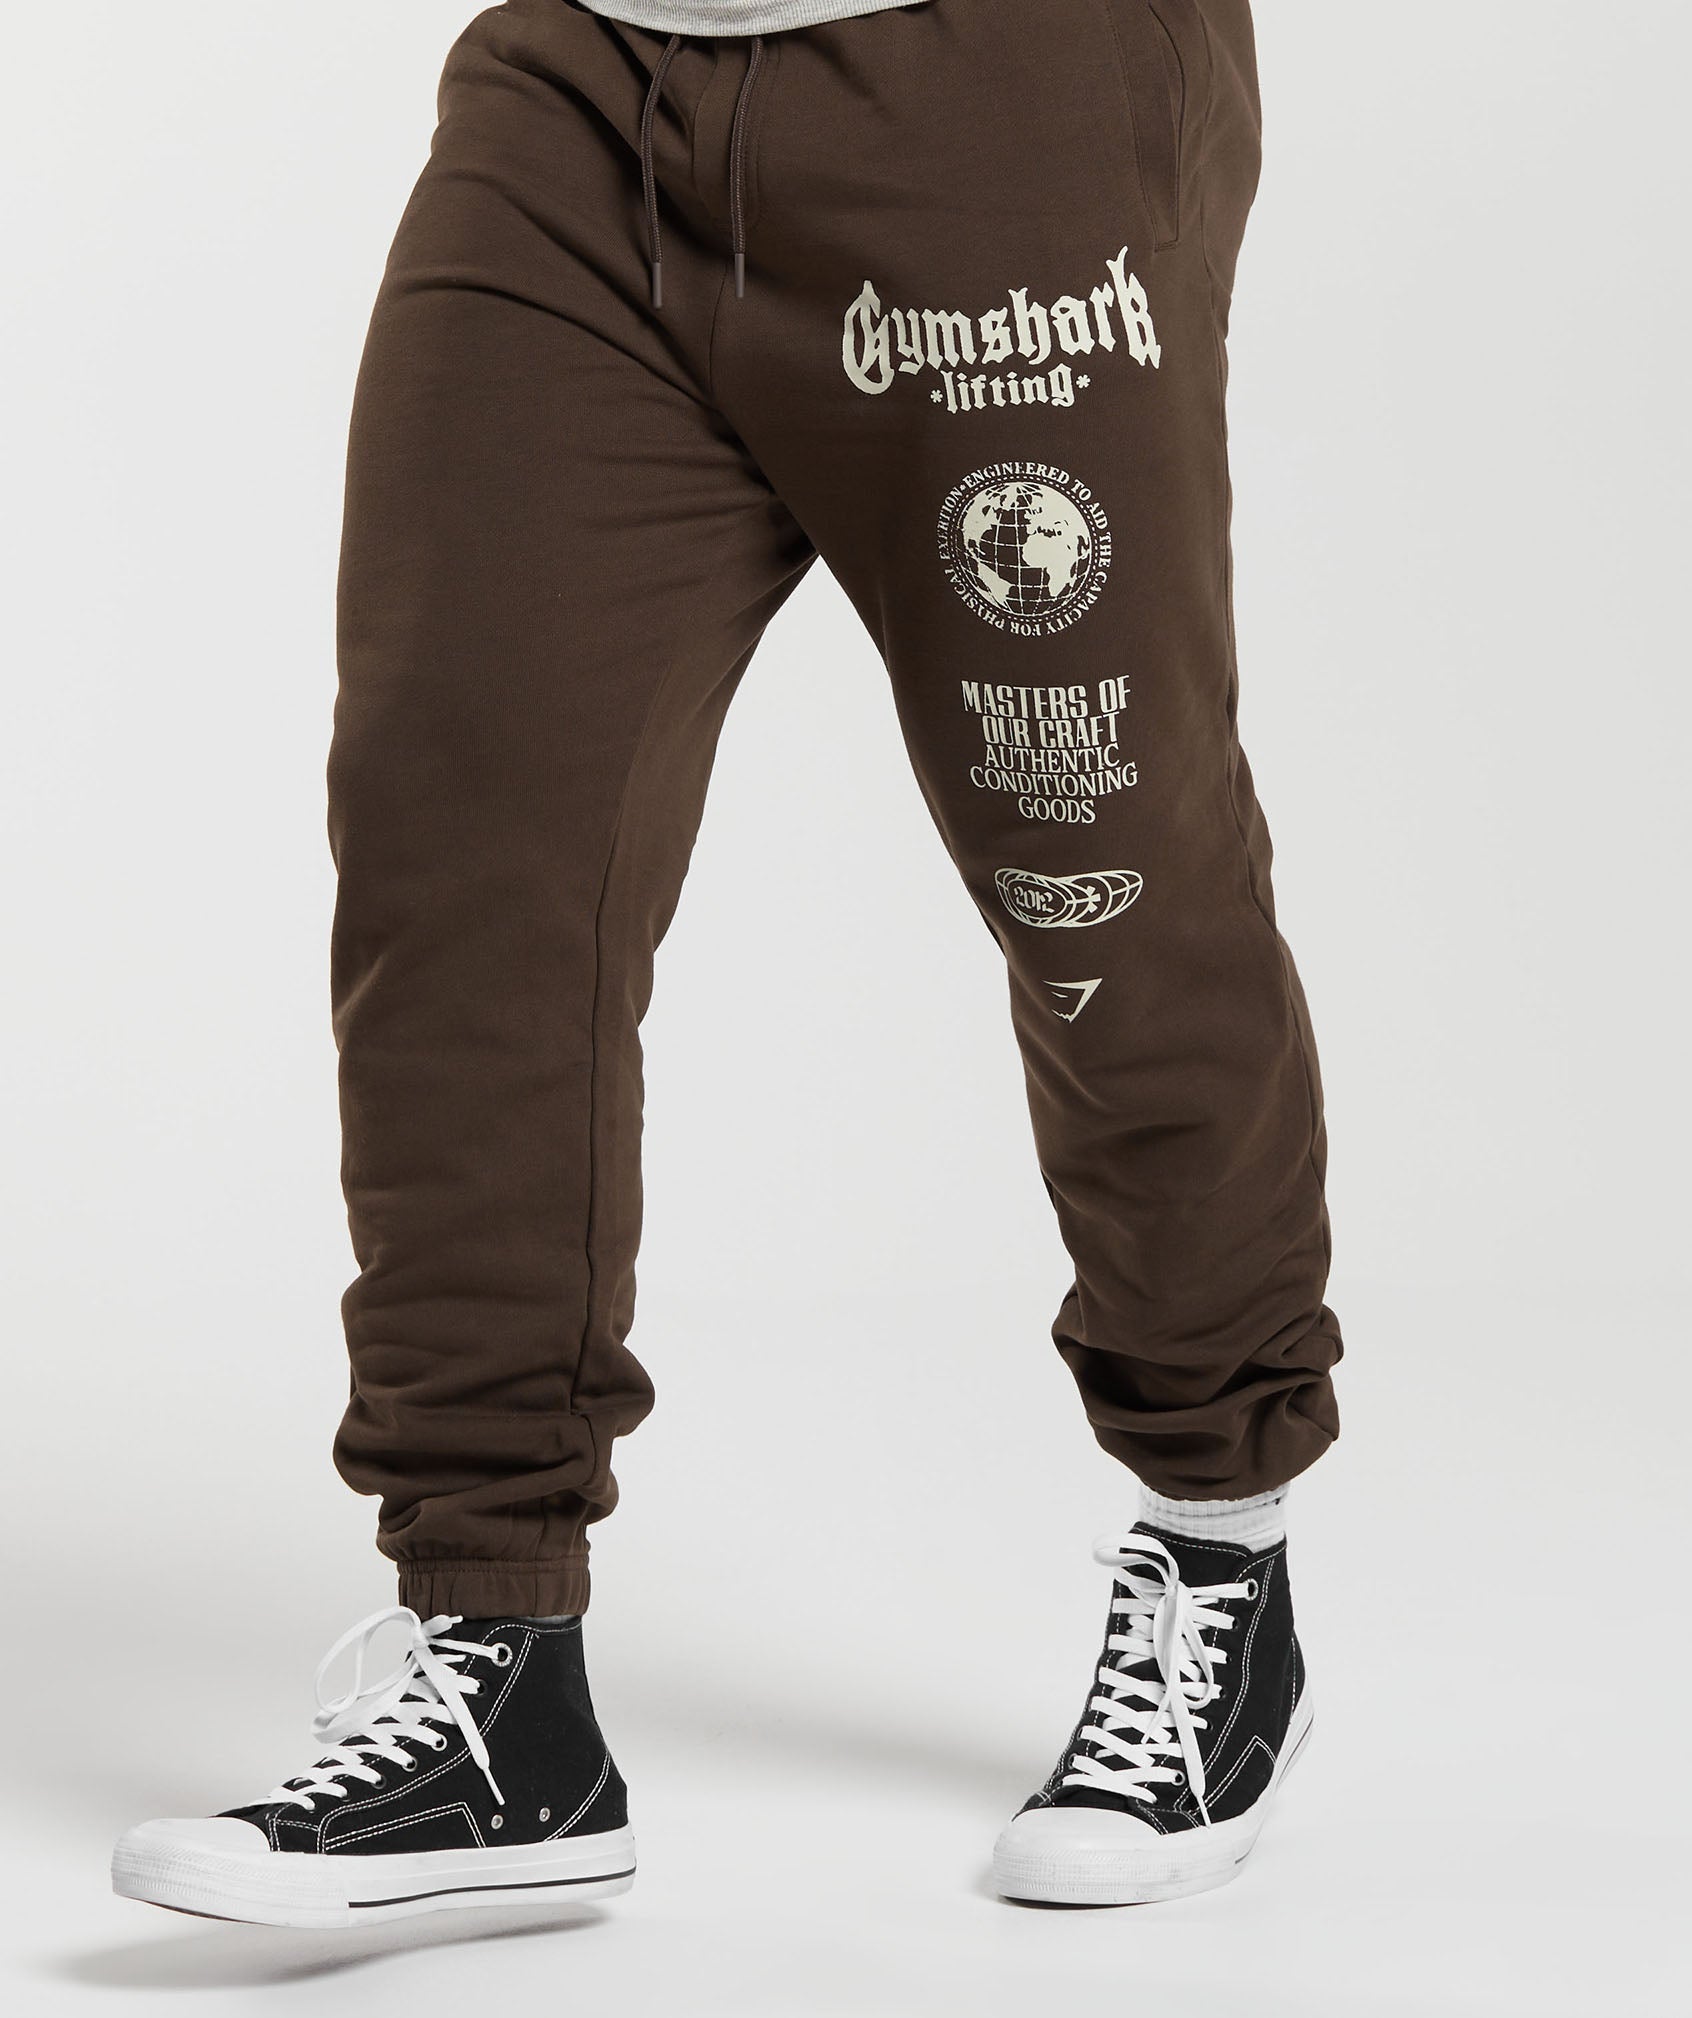 Global Lifting Oversized Pants in Brown - view 3